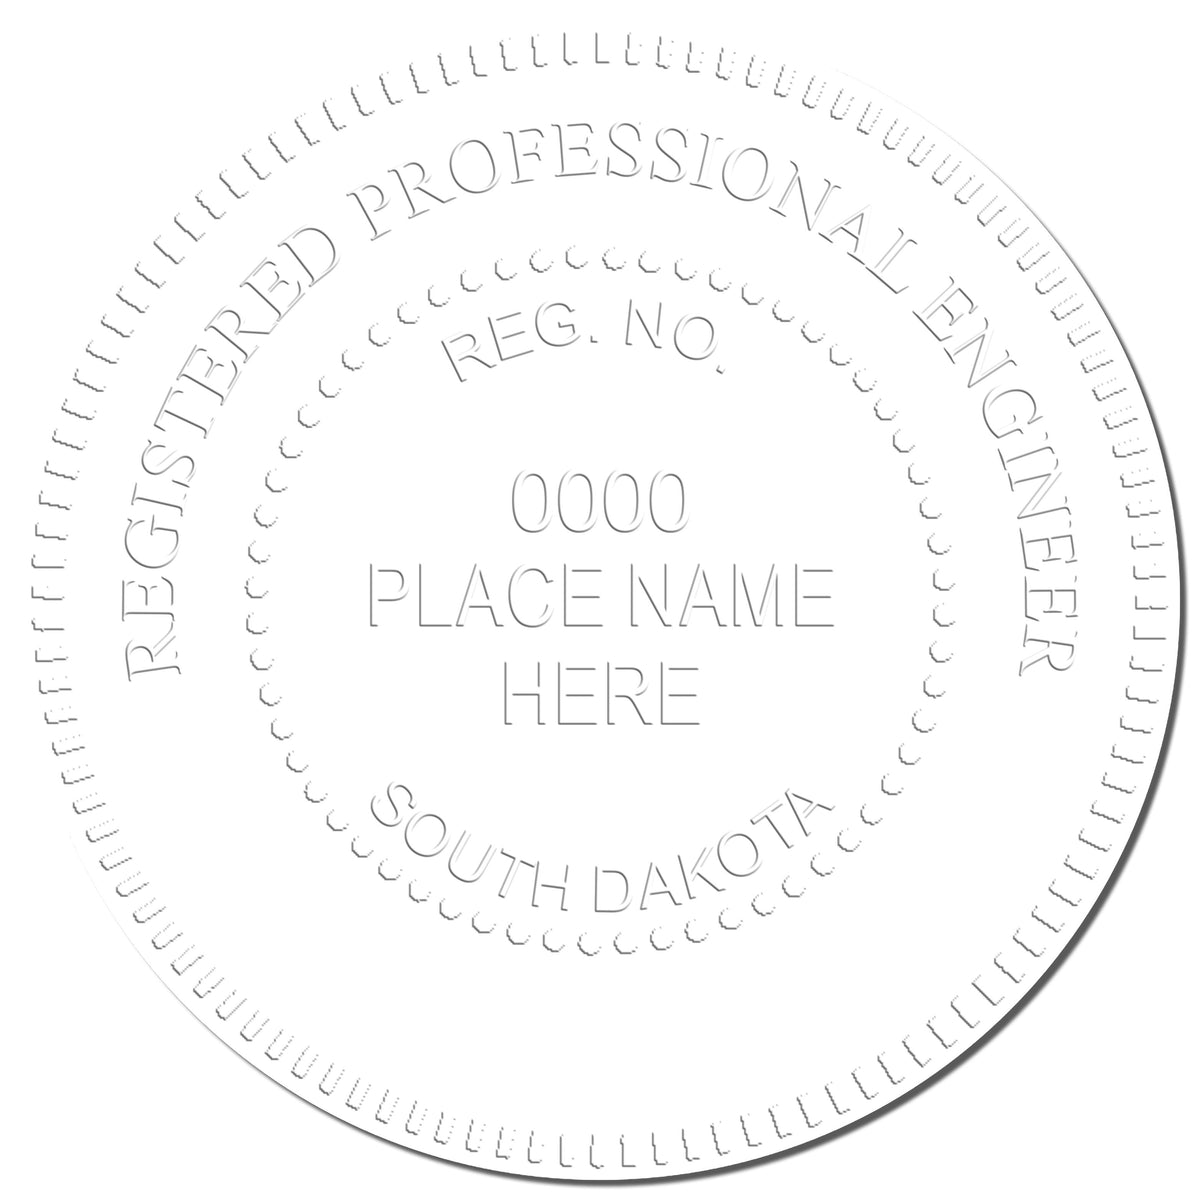 The Soft South Dakota Professional Engineer Seal stamp impression comes to life with a crisp, detailed photo on paper - showcasing true professional quality.